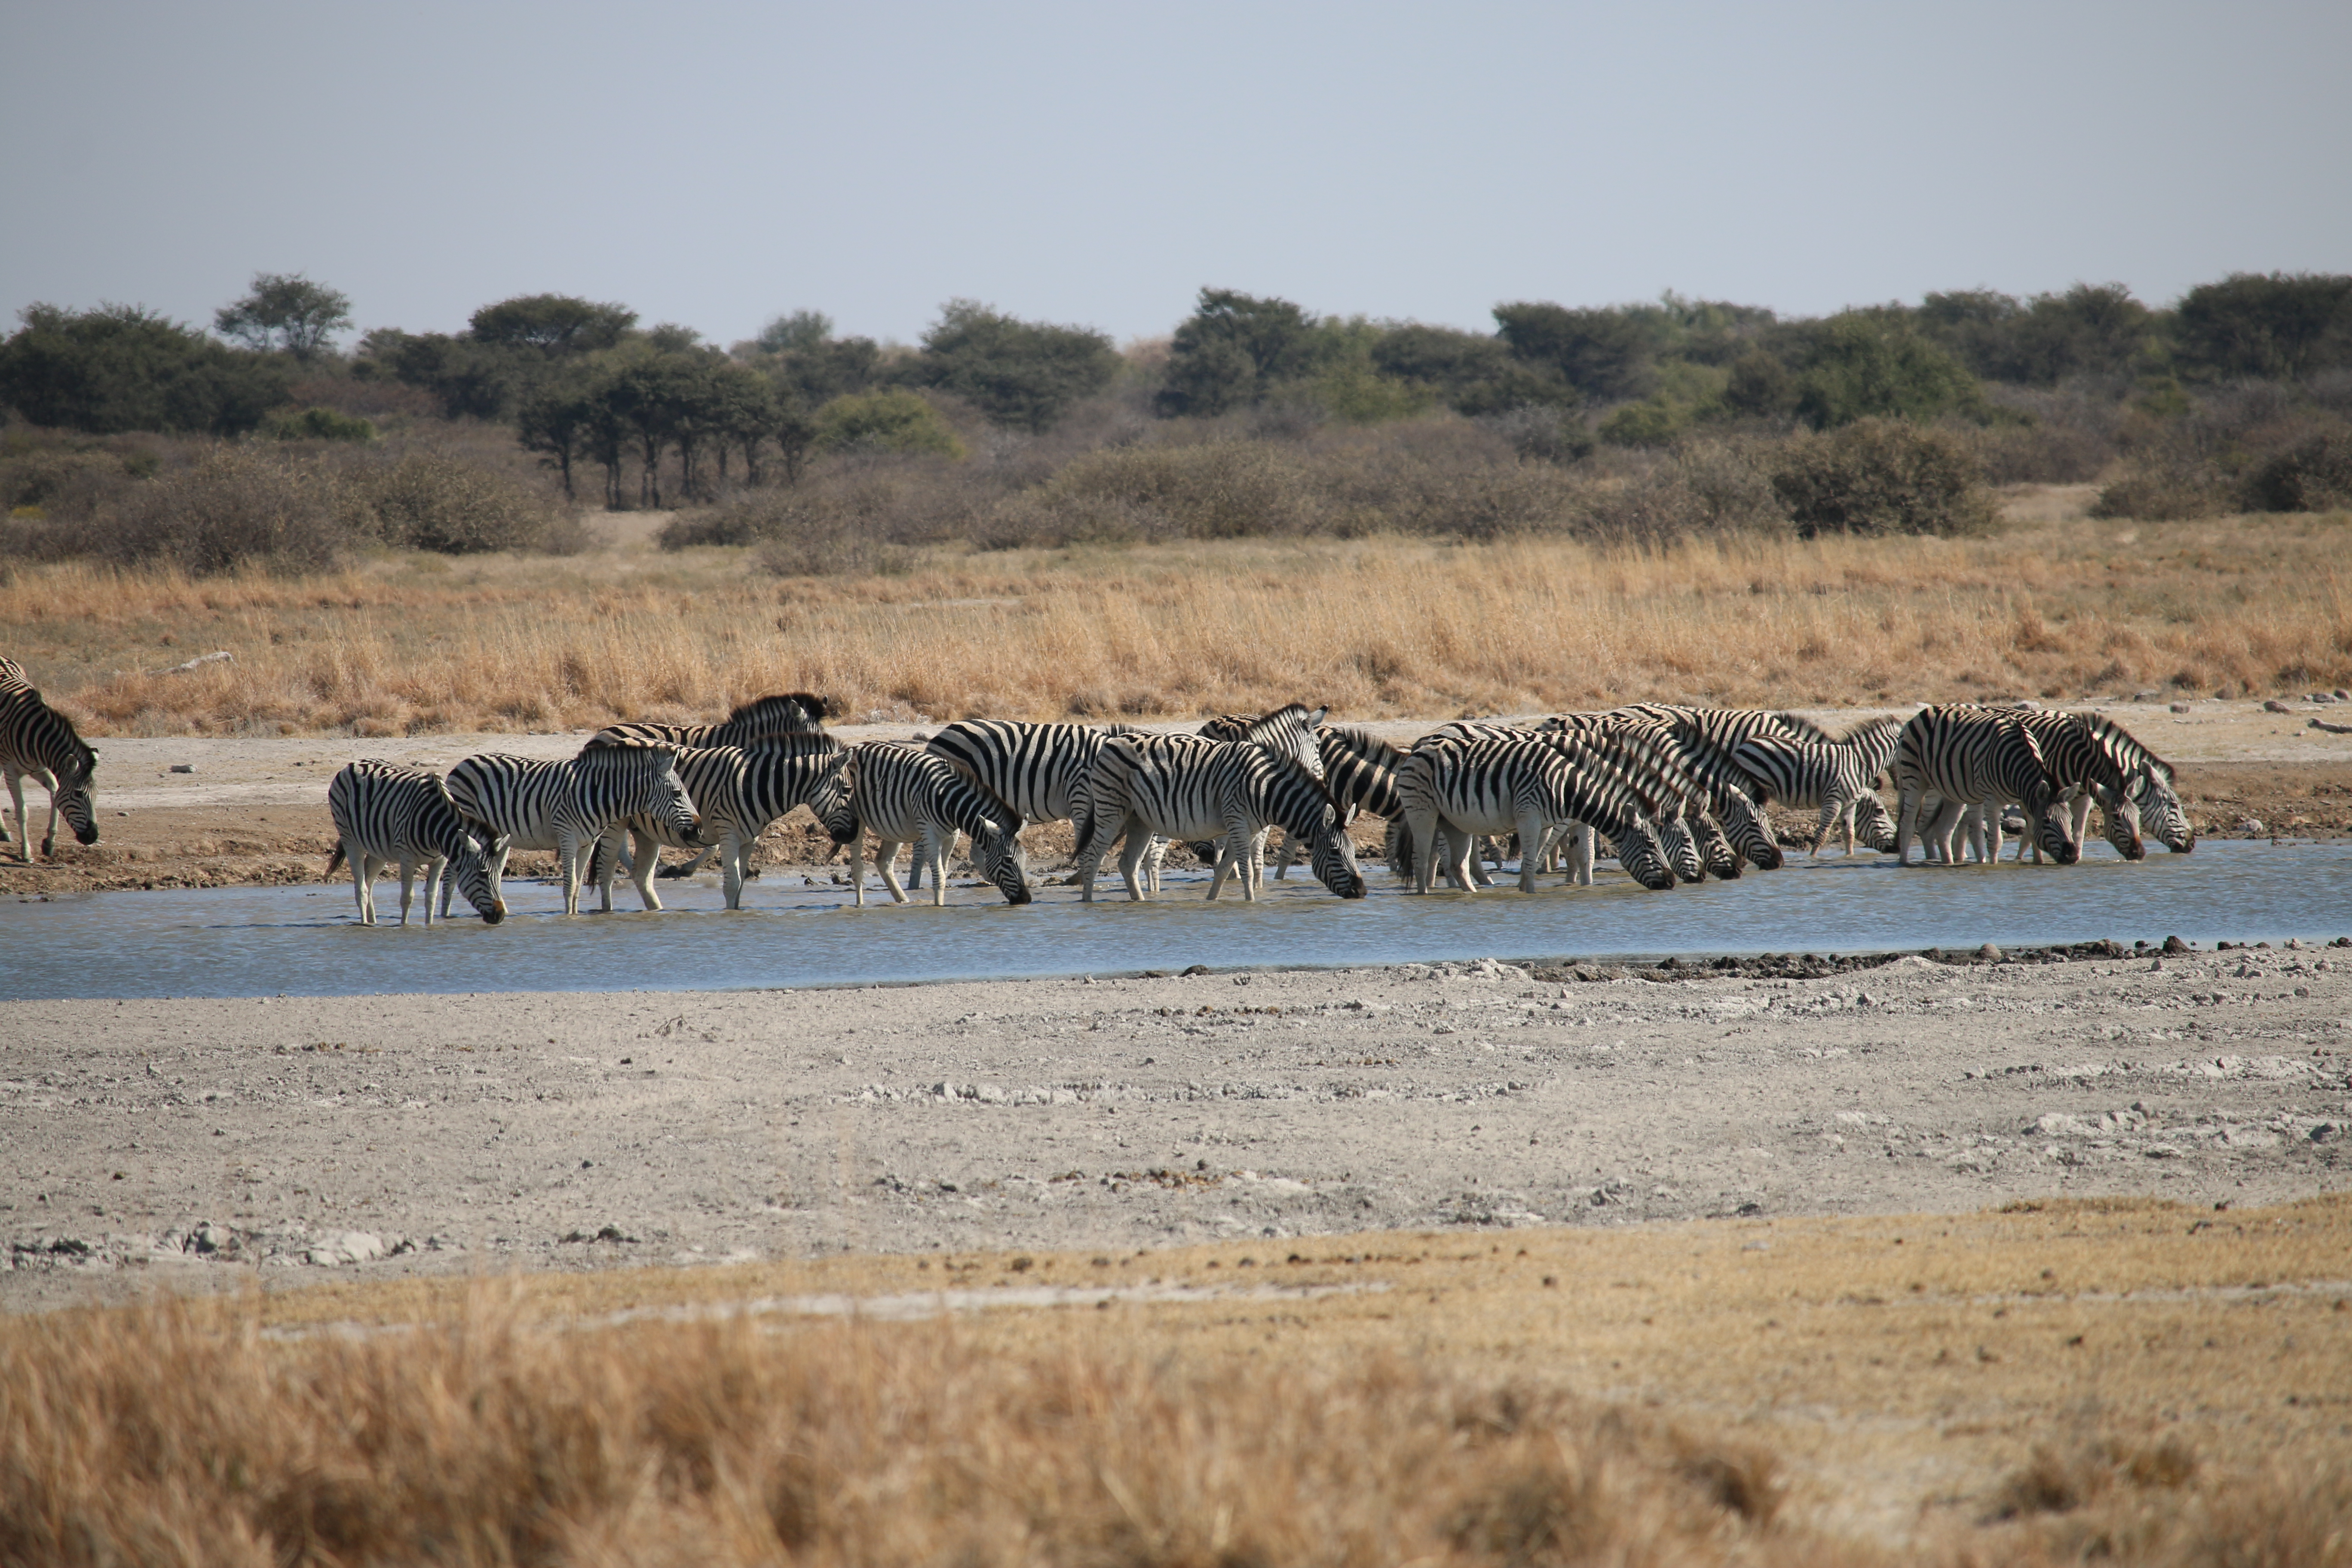 Zebras at the watering hole. At this moment I can't believe where I am. 